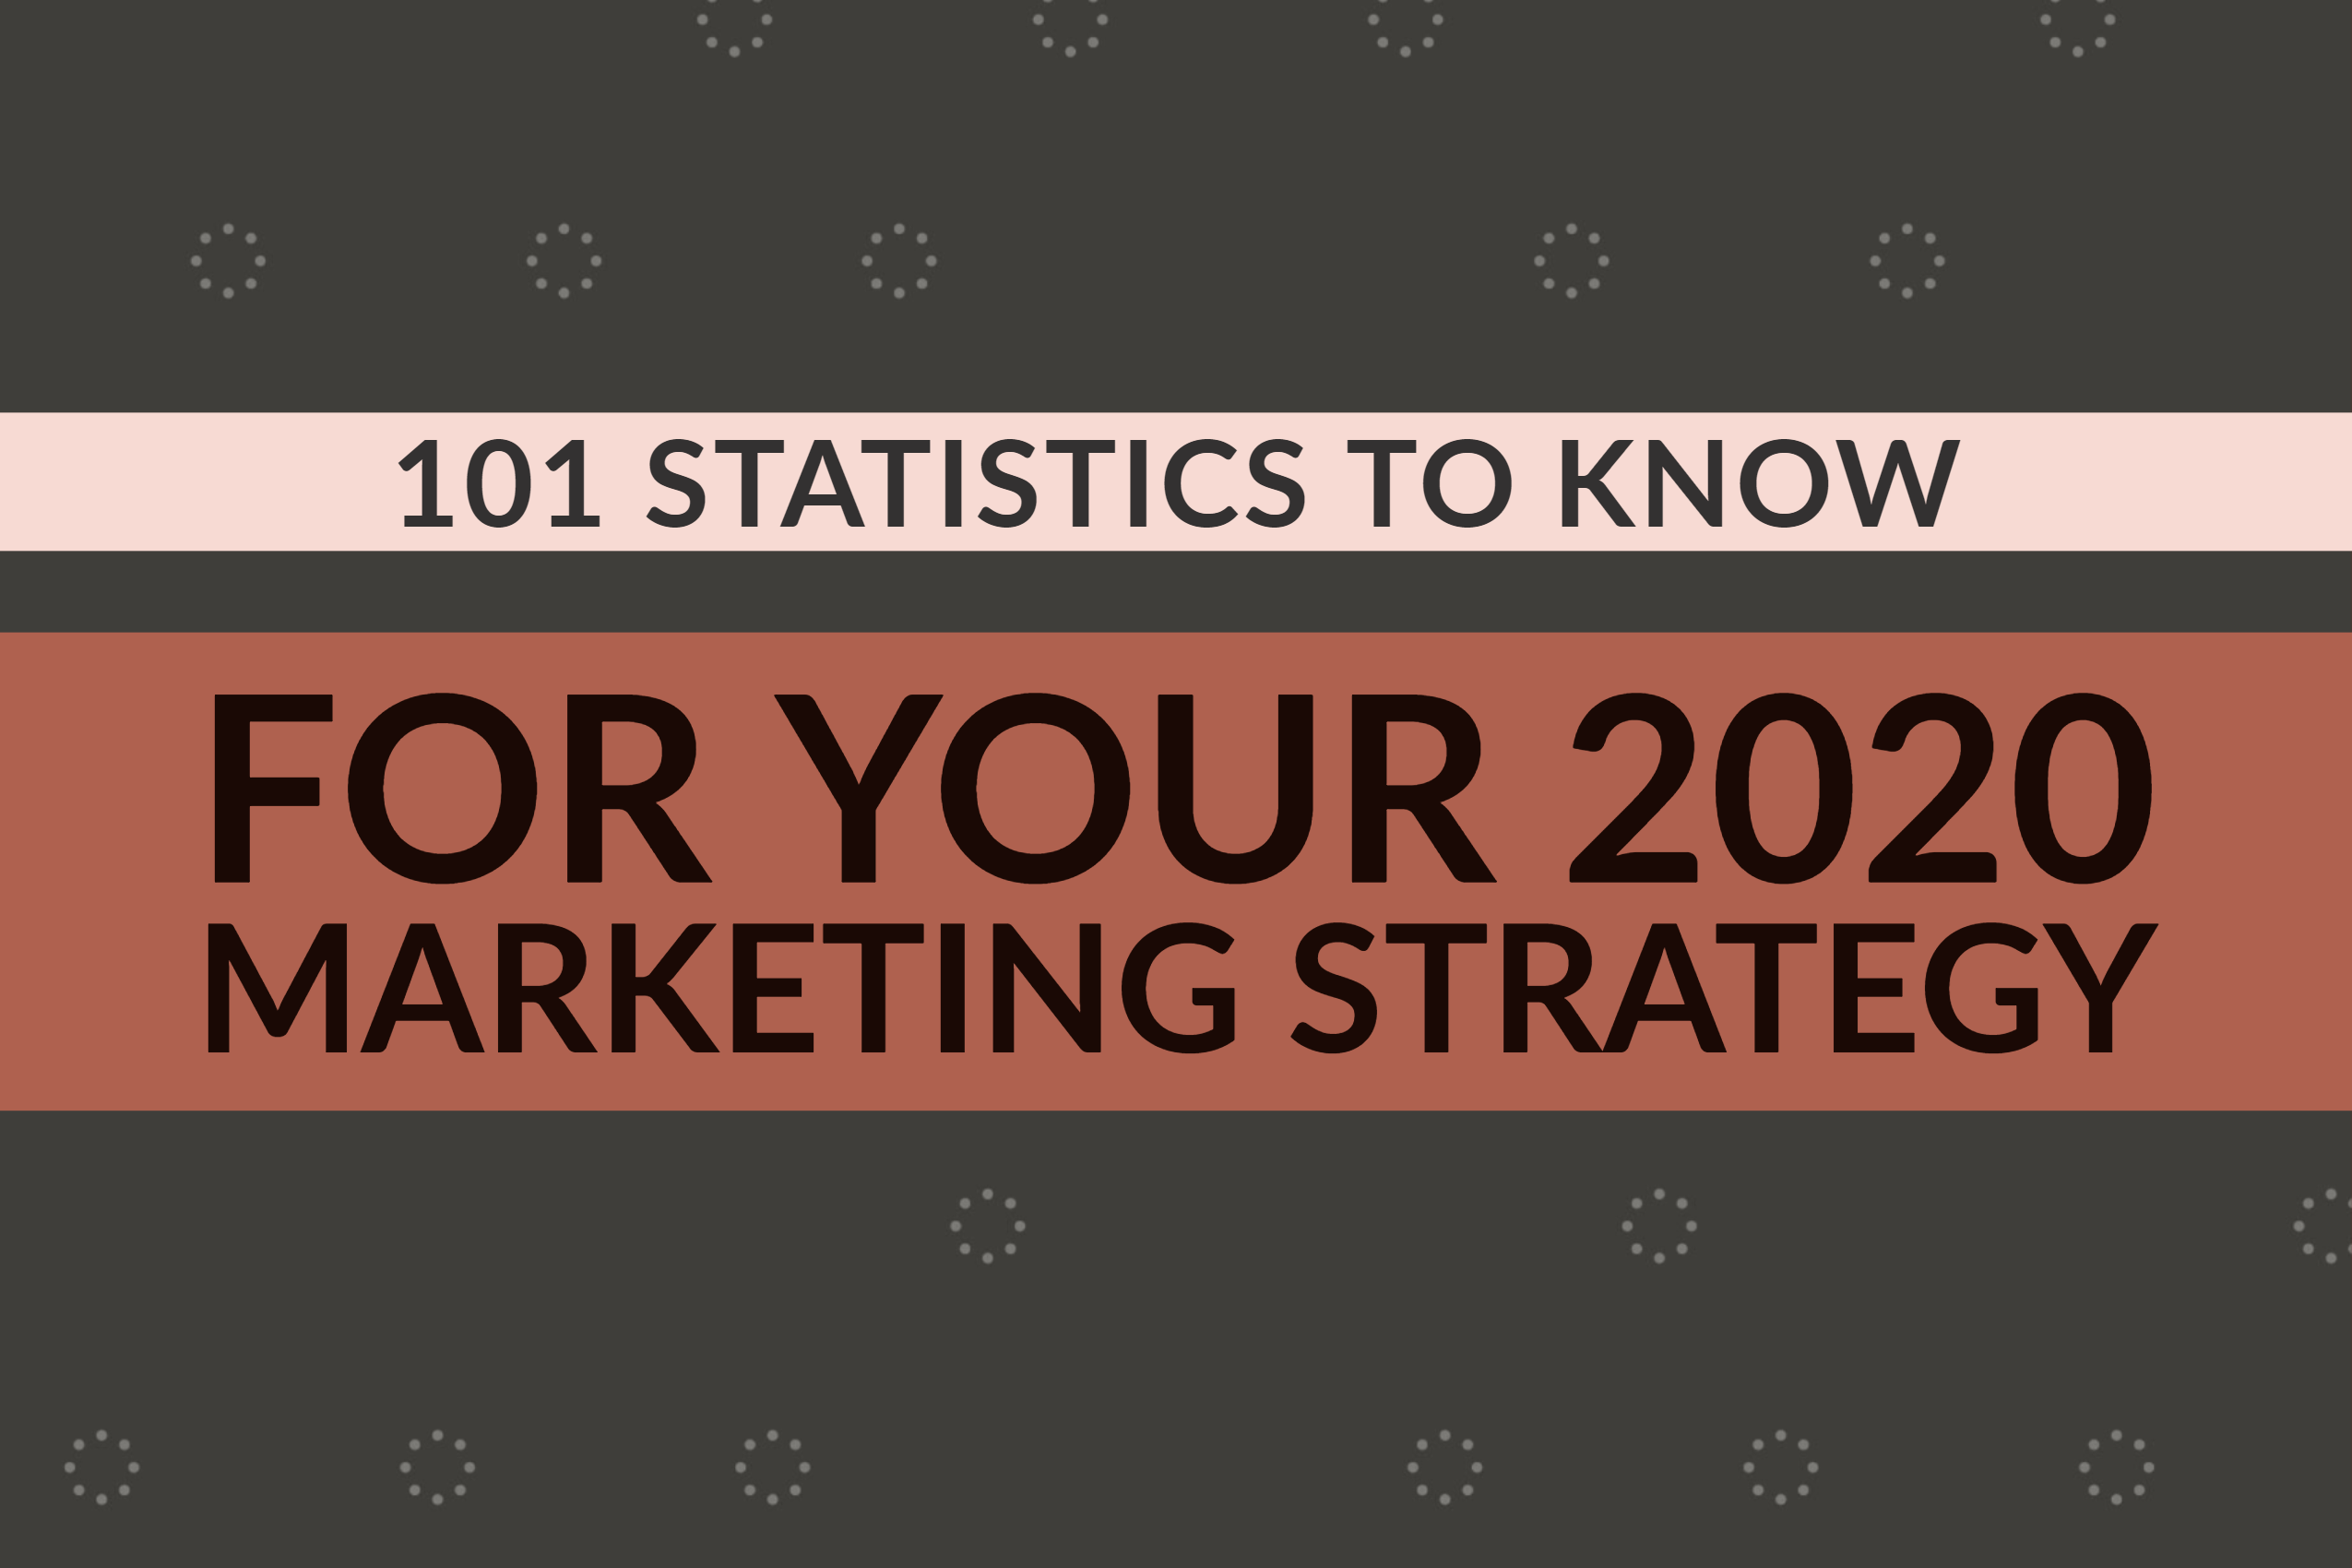 101 Statistics To Know For Your 2020 Marketing Strategy